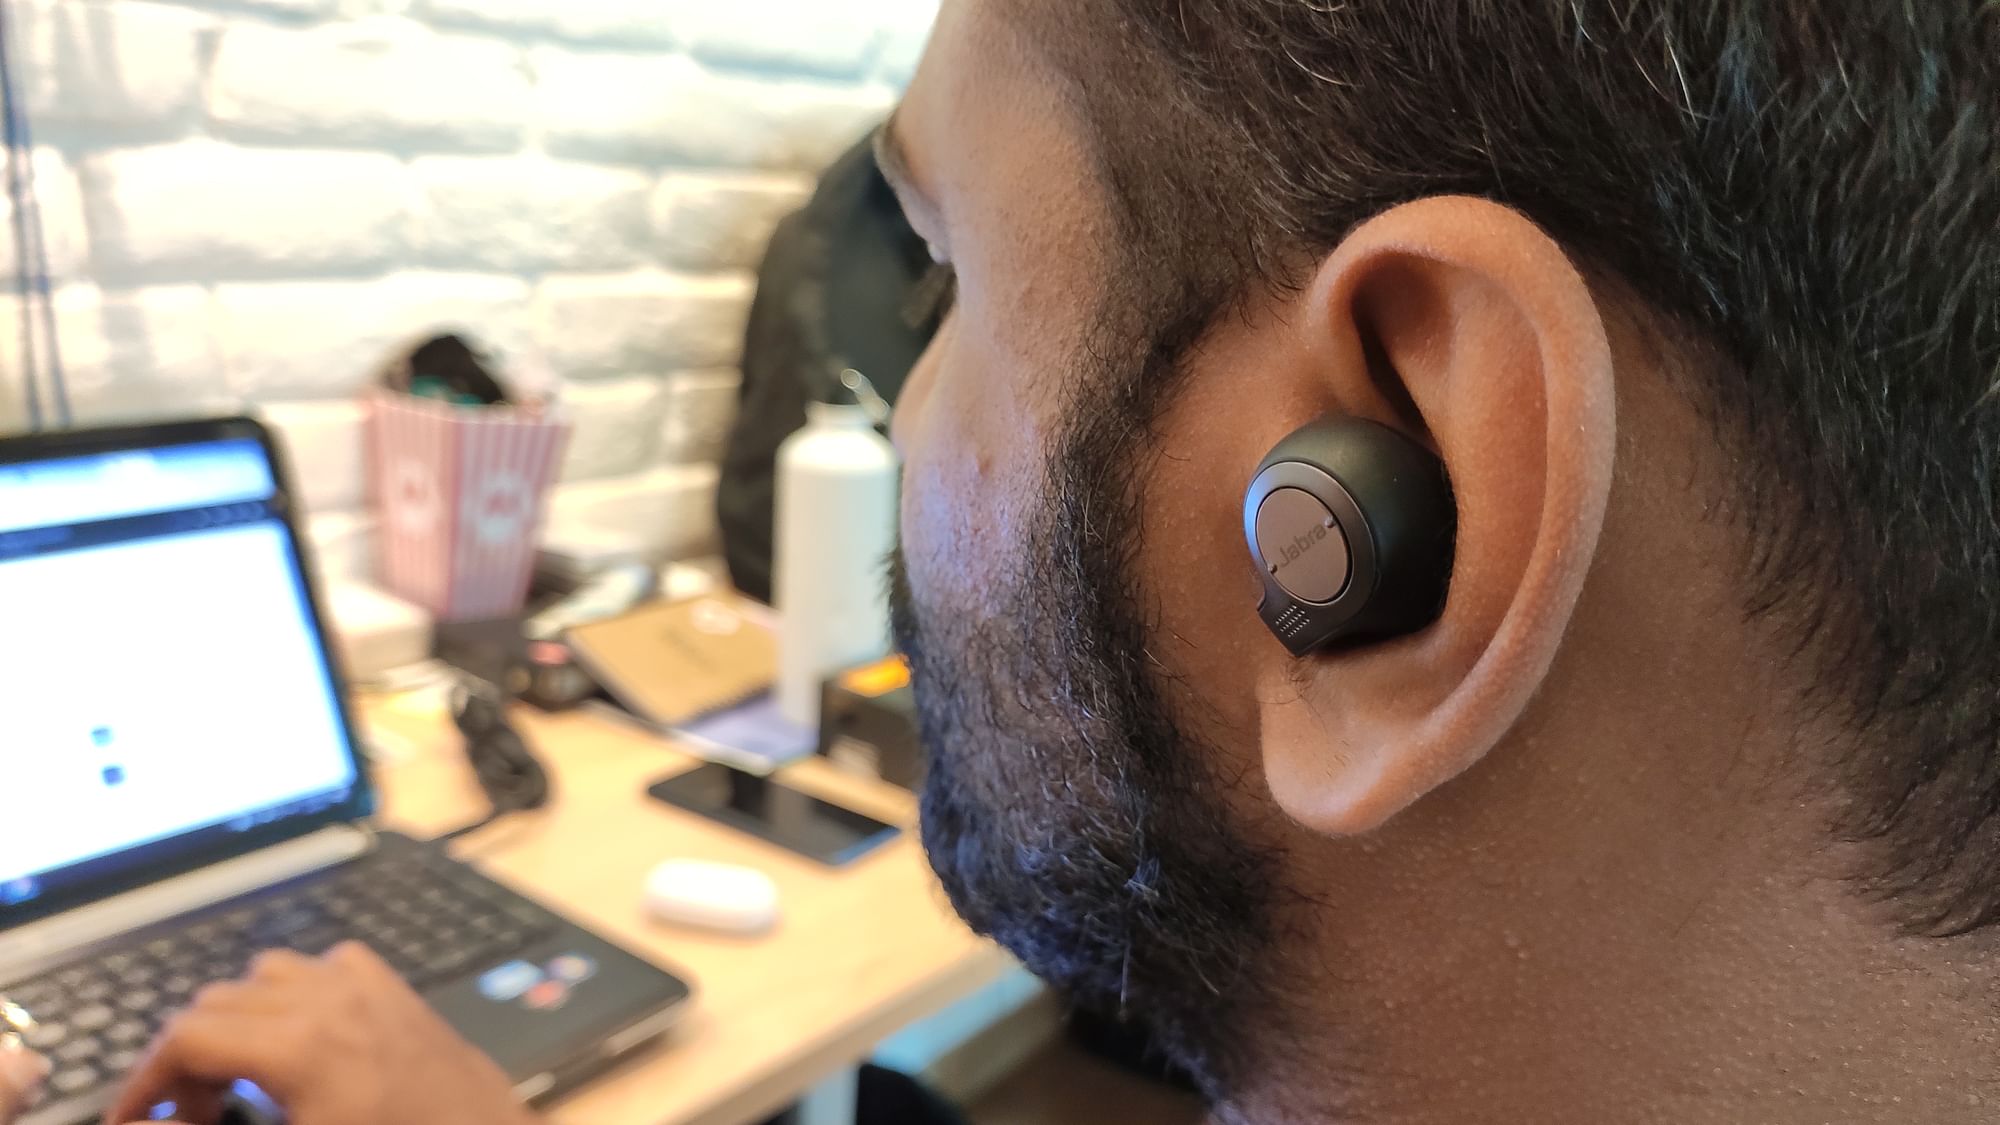 Getting wireless earbuds is now pocket-friendly in India.